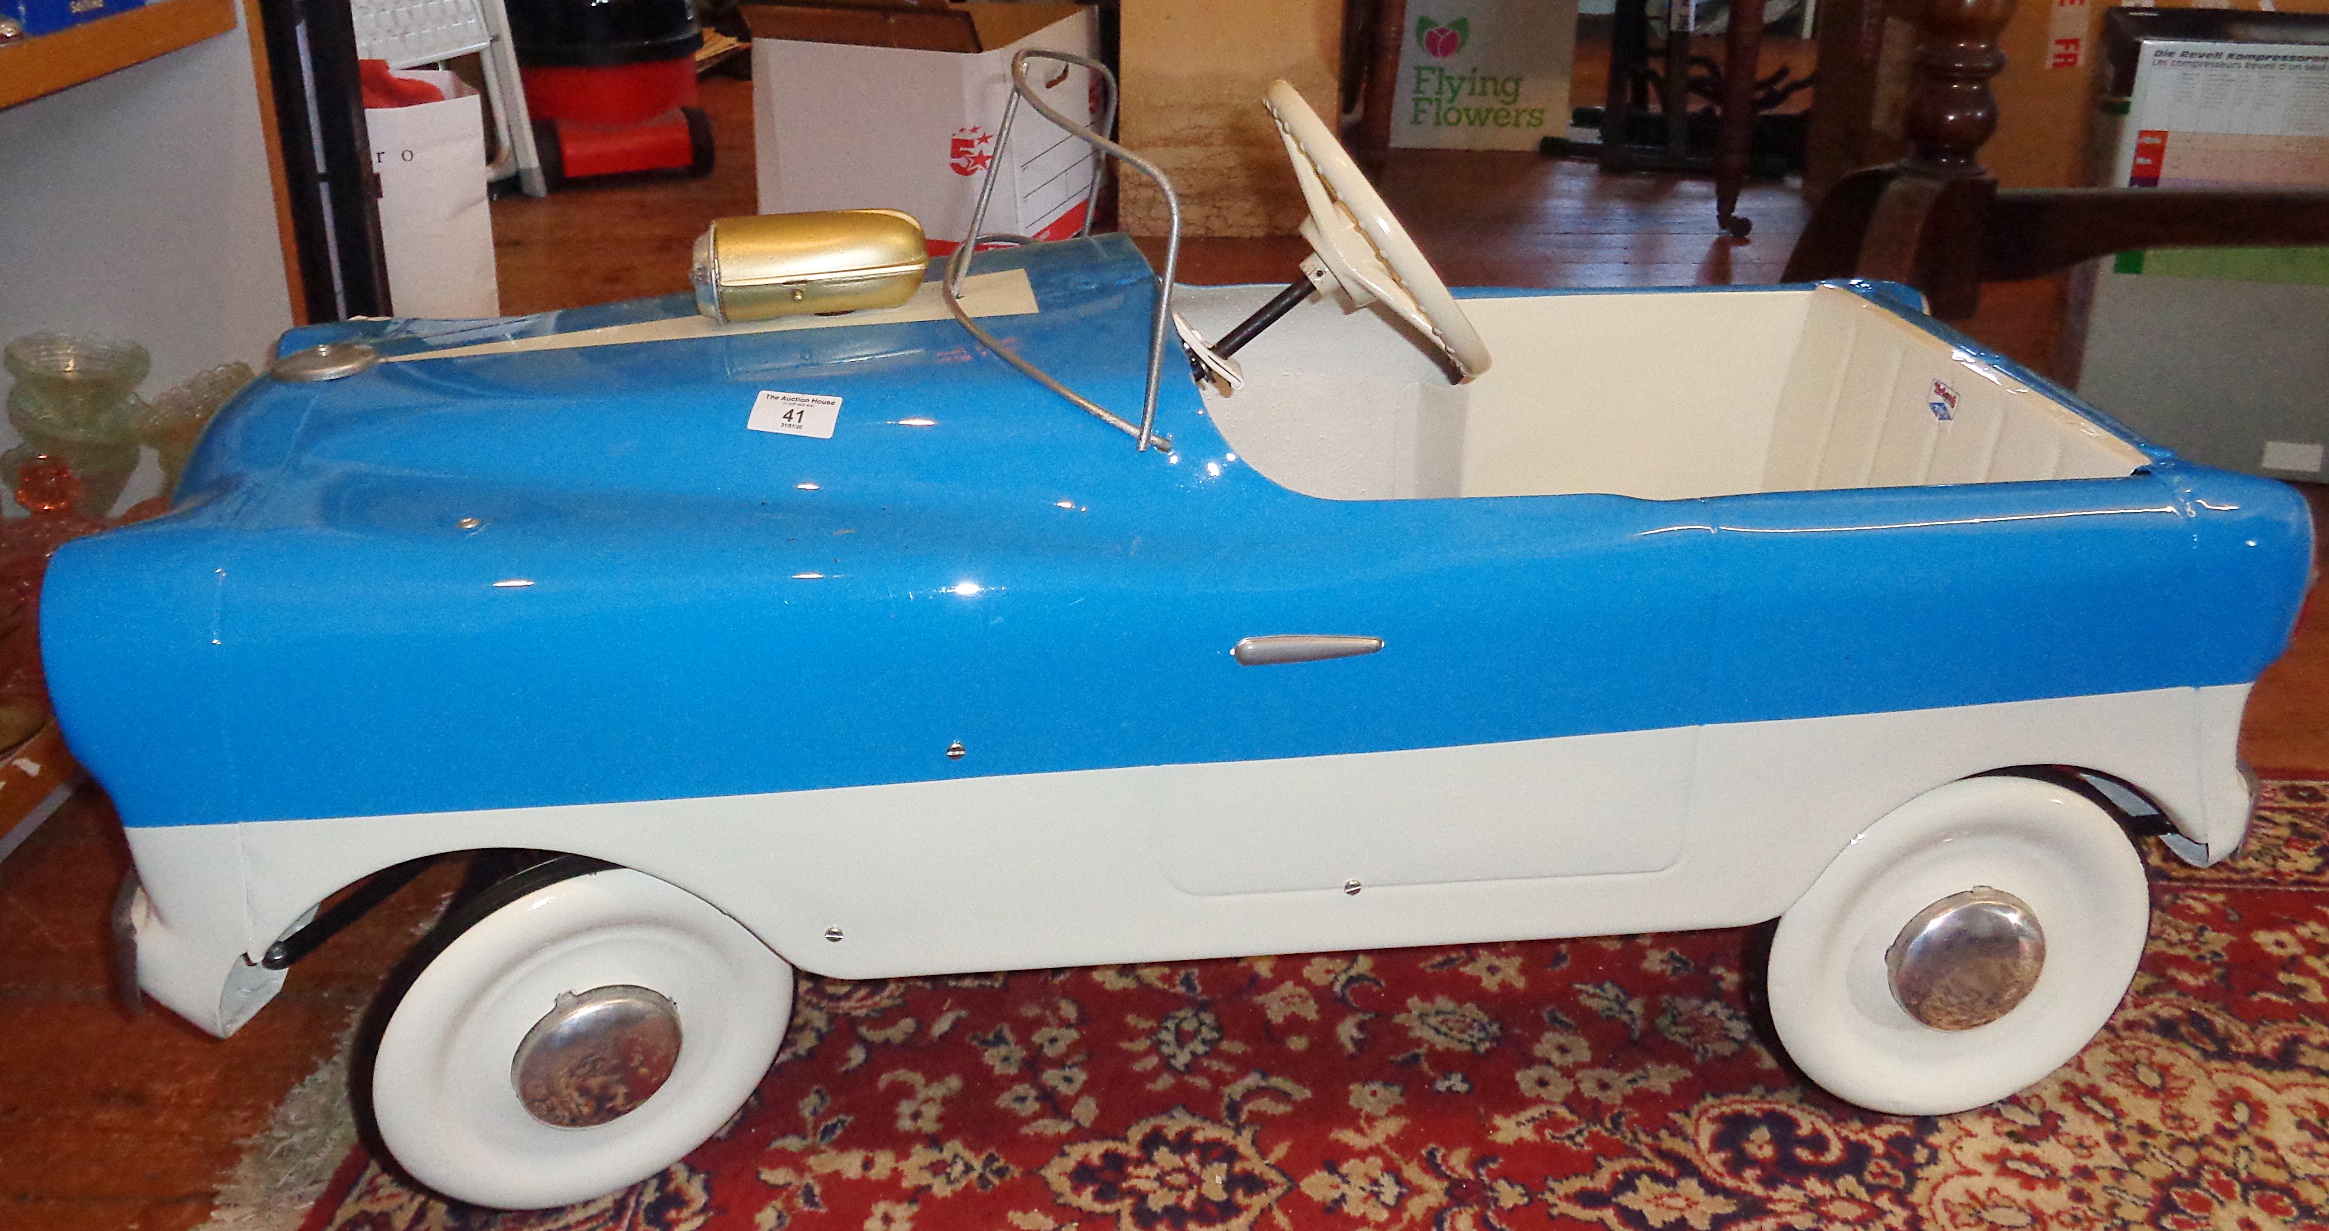 Tri-ang Ford Zephyr Pedal Car, c.1950's (professionally re-sprayed)